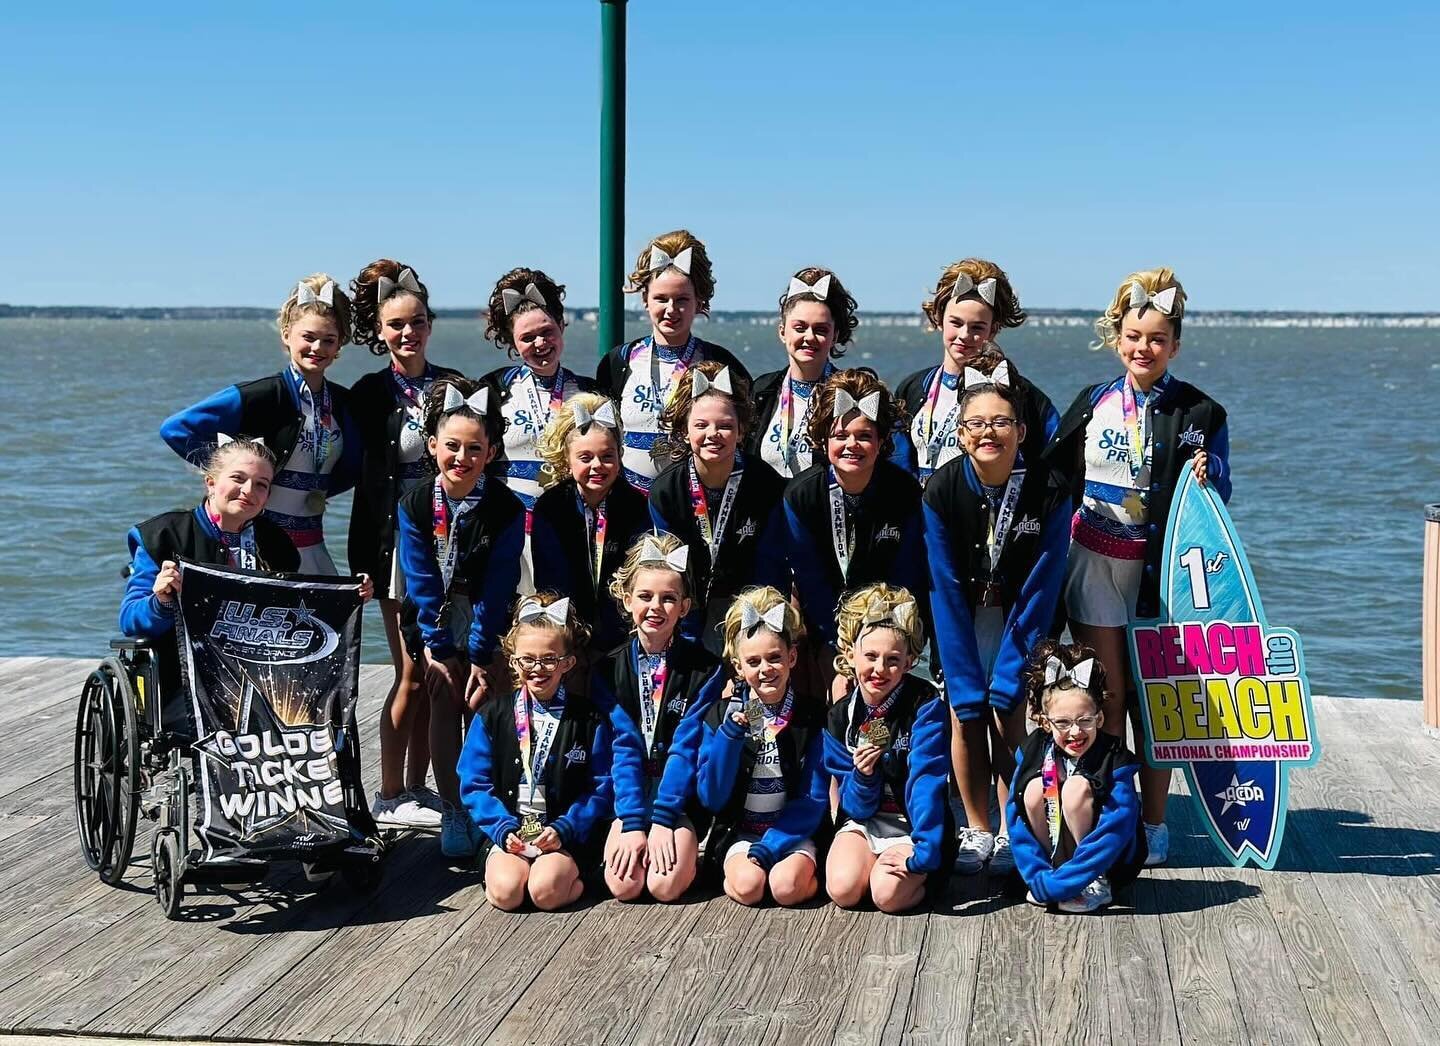 What a successful weekend! Flare is your new Junior 1 champion and paid US Finals bid winner! Dazzle climbed from 5th place to 2nd place with an energy packed routine and the highest score in program history, a 98.07! Next stop, US Finals💙🩷
.
.
.
#